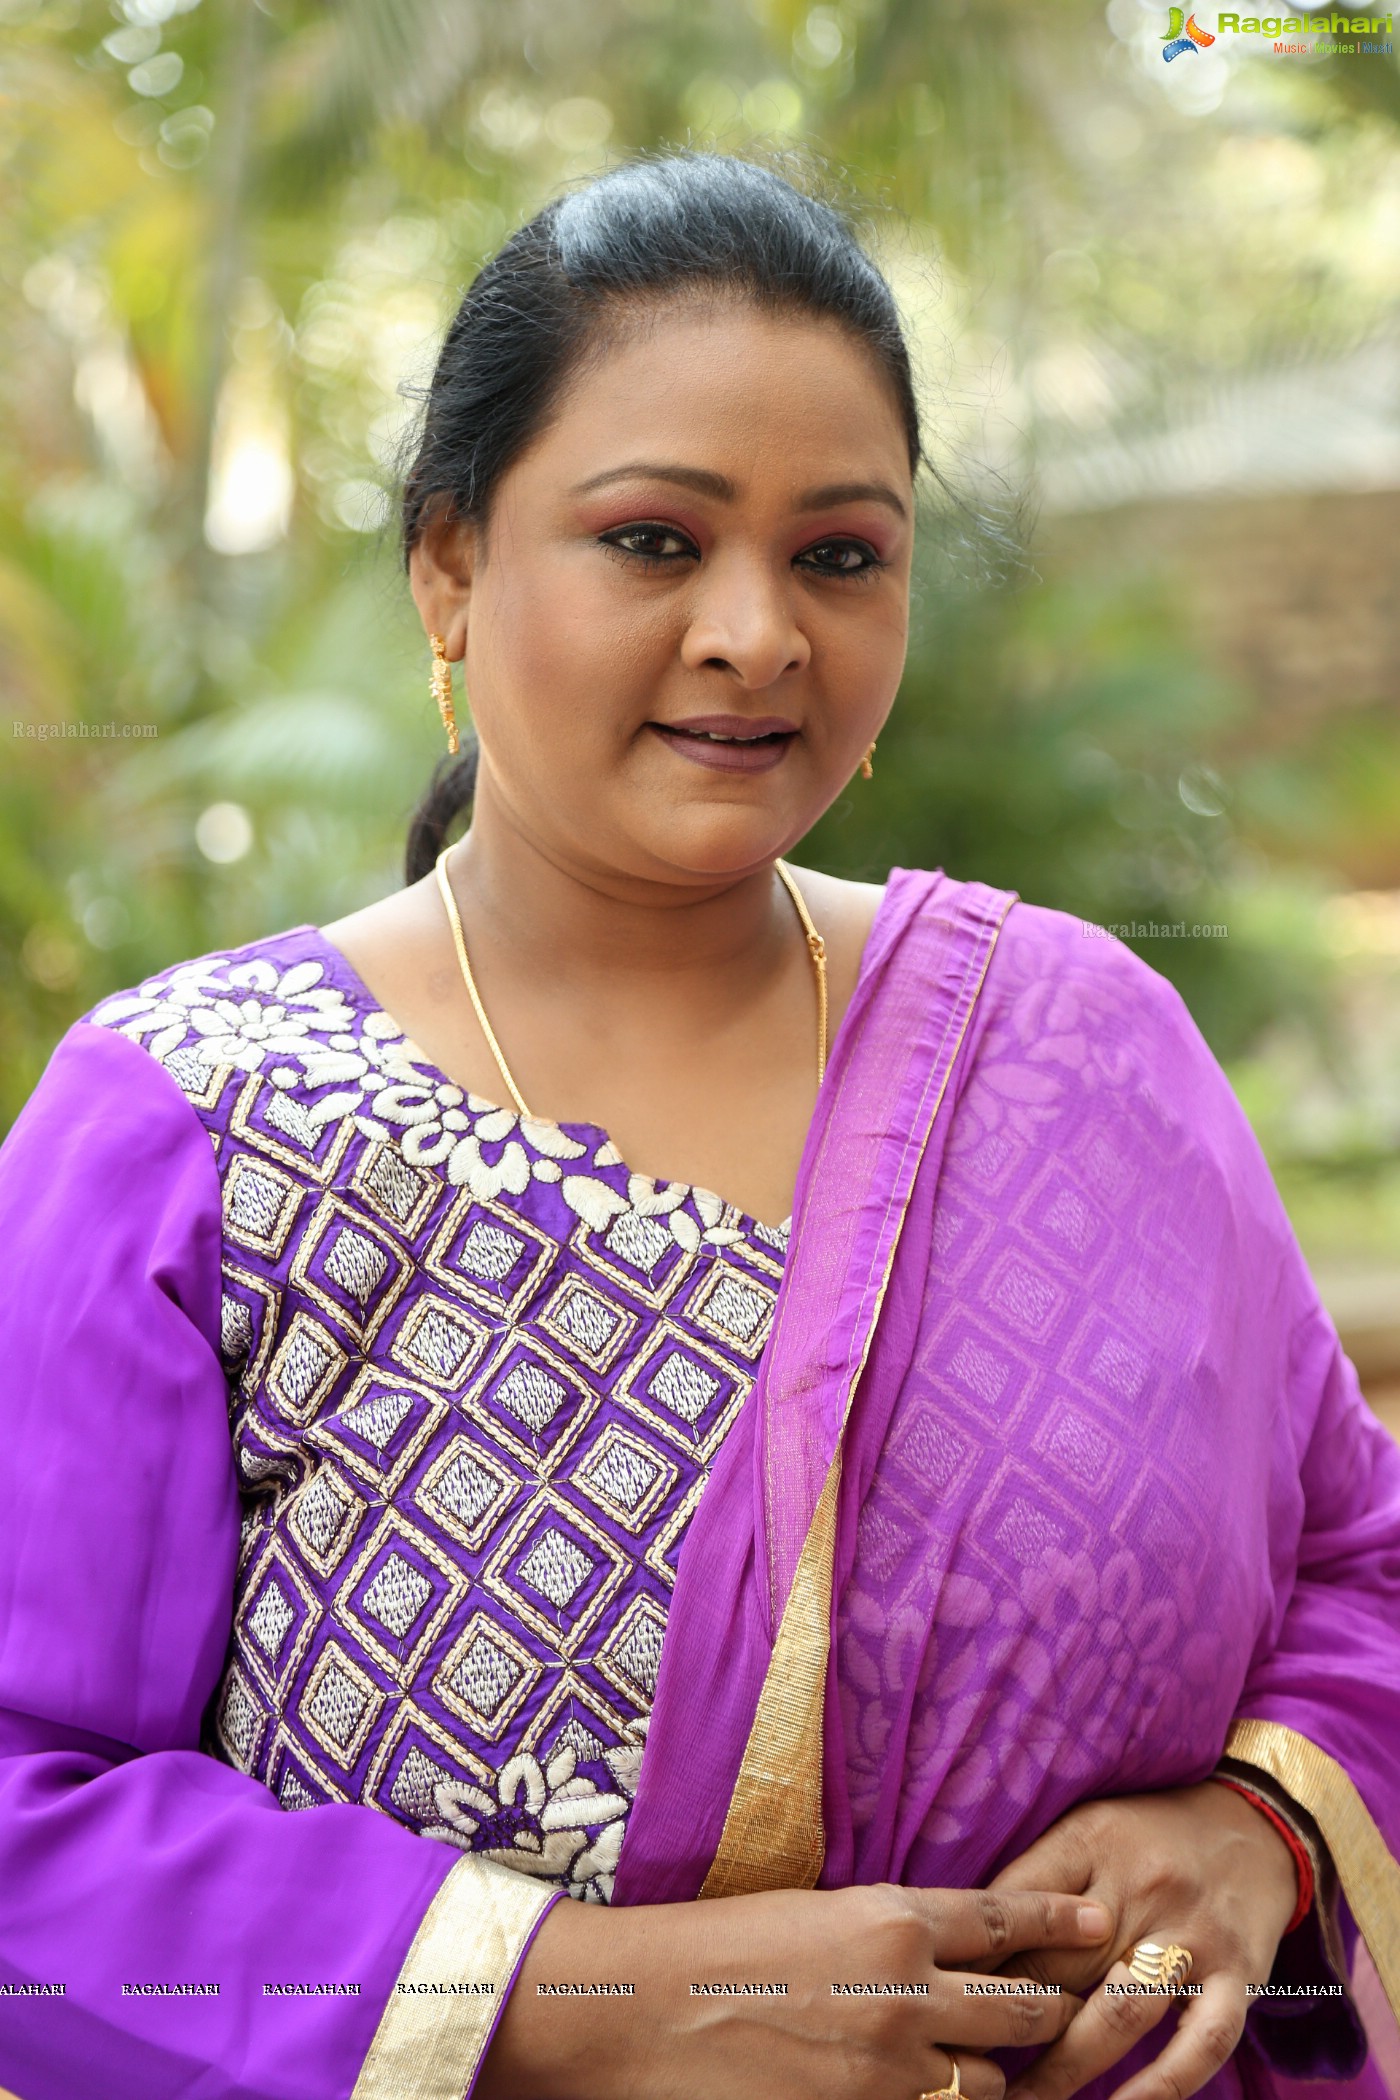 Shakeela at Seelavathi Teaser Launch (Posters)